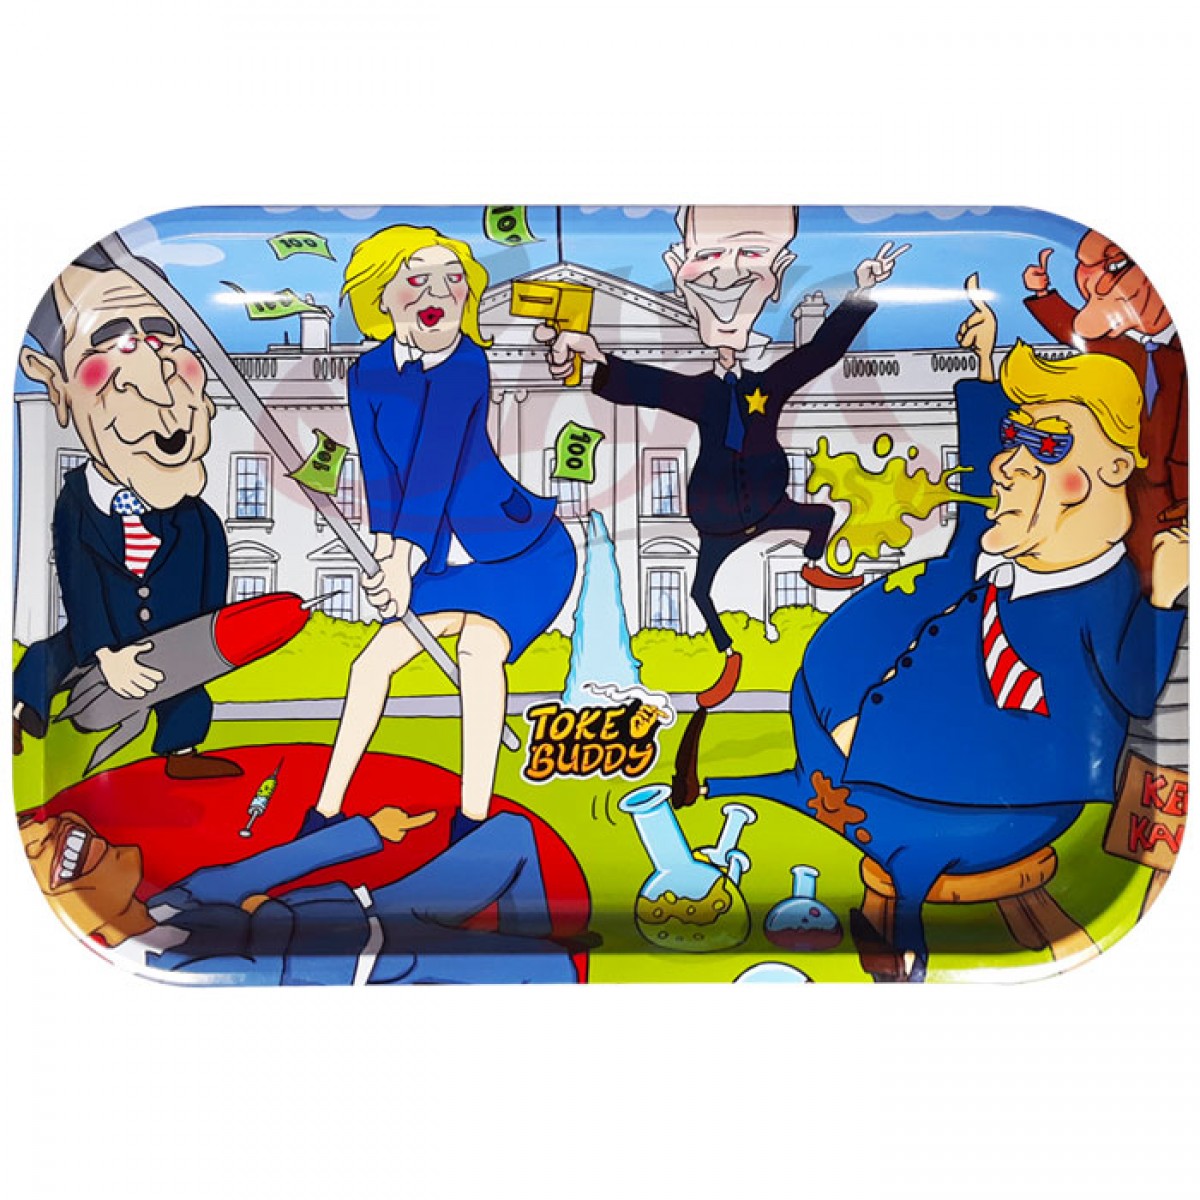 Toke Buddy Metal Rolling Tray | White House